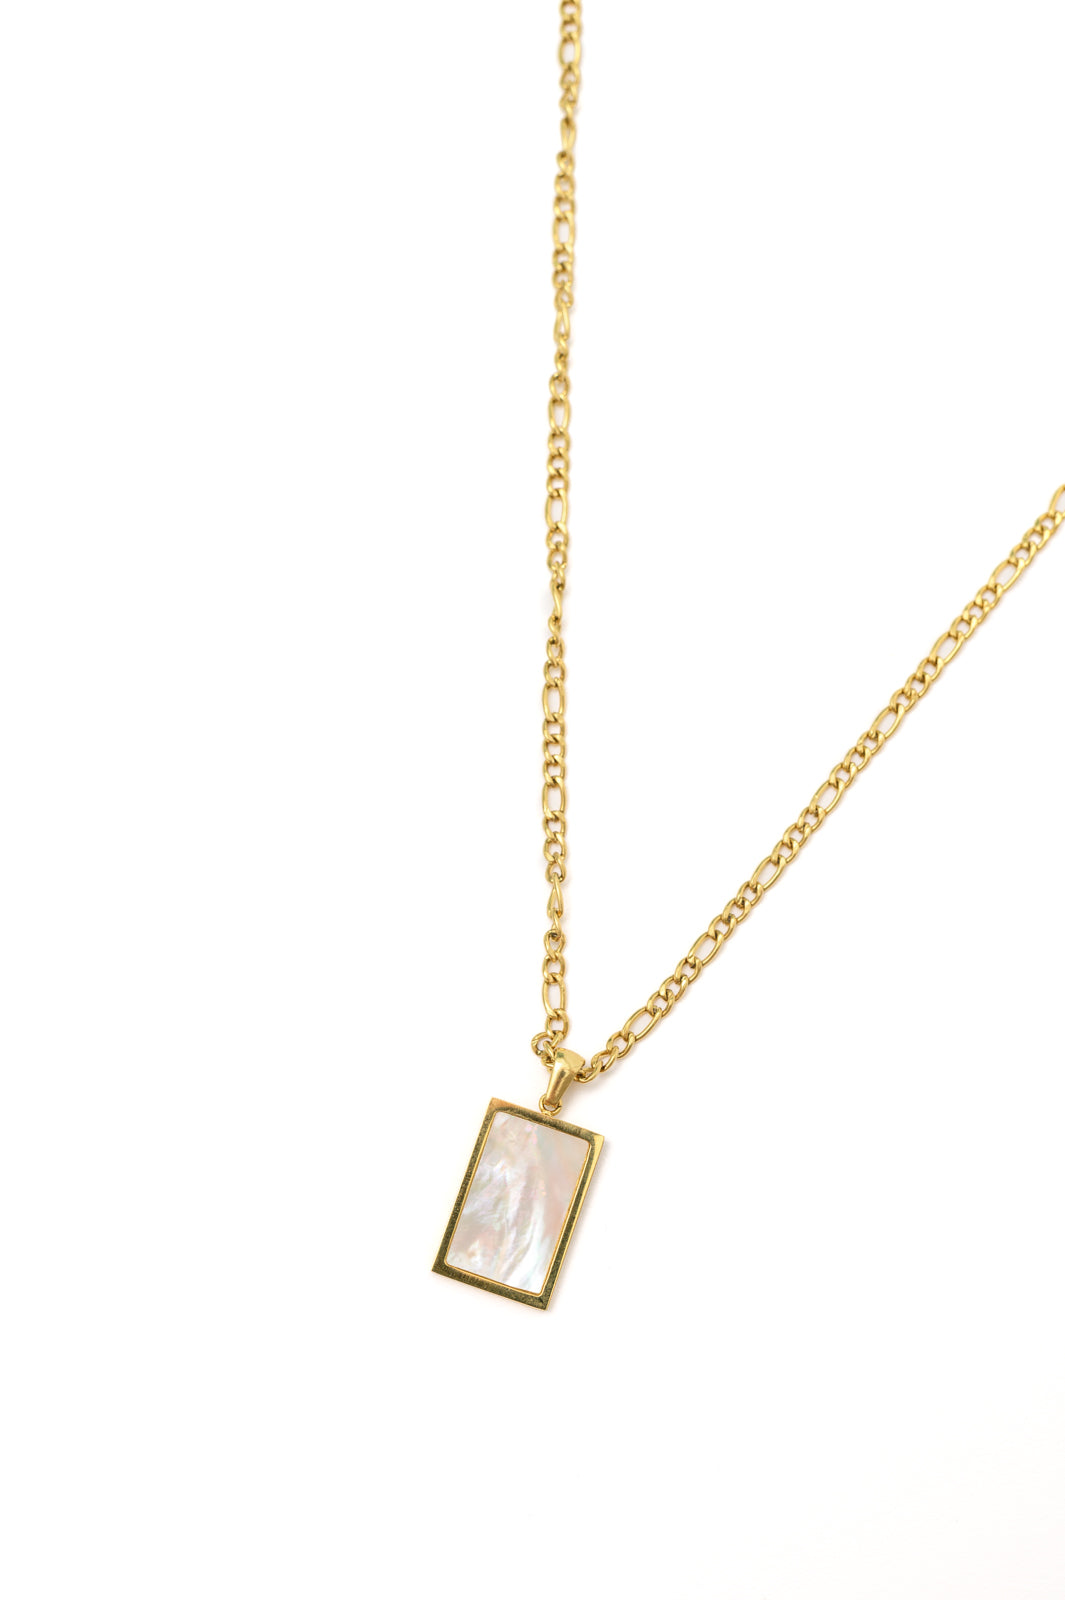 This Subtly Sweet Pendant Necklace is the perfect way to add a touch of glamour to any look. The 18k gold-plated link chain and rectangle shell pendant combine for a classic chic look that never goes out of style. Make a statement with this timeless piece!